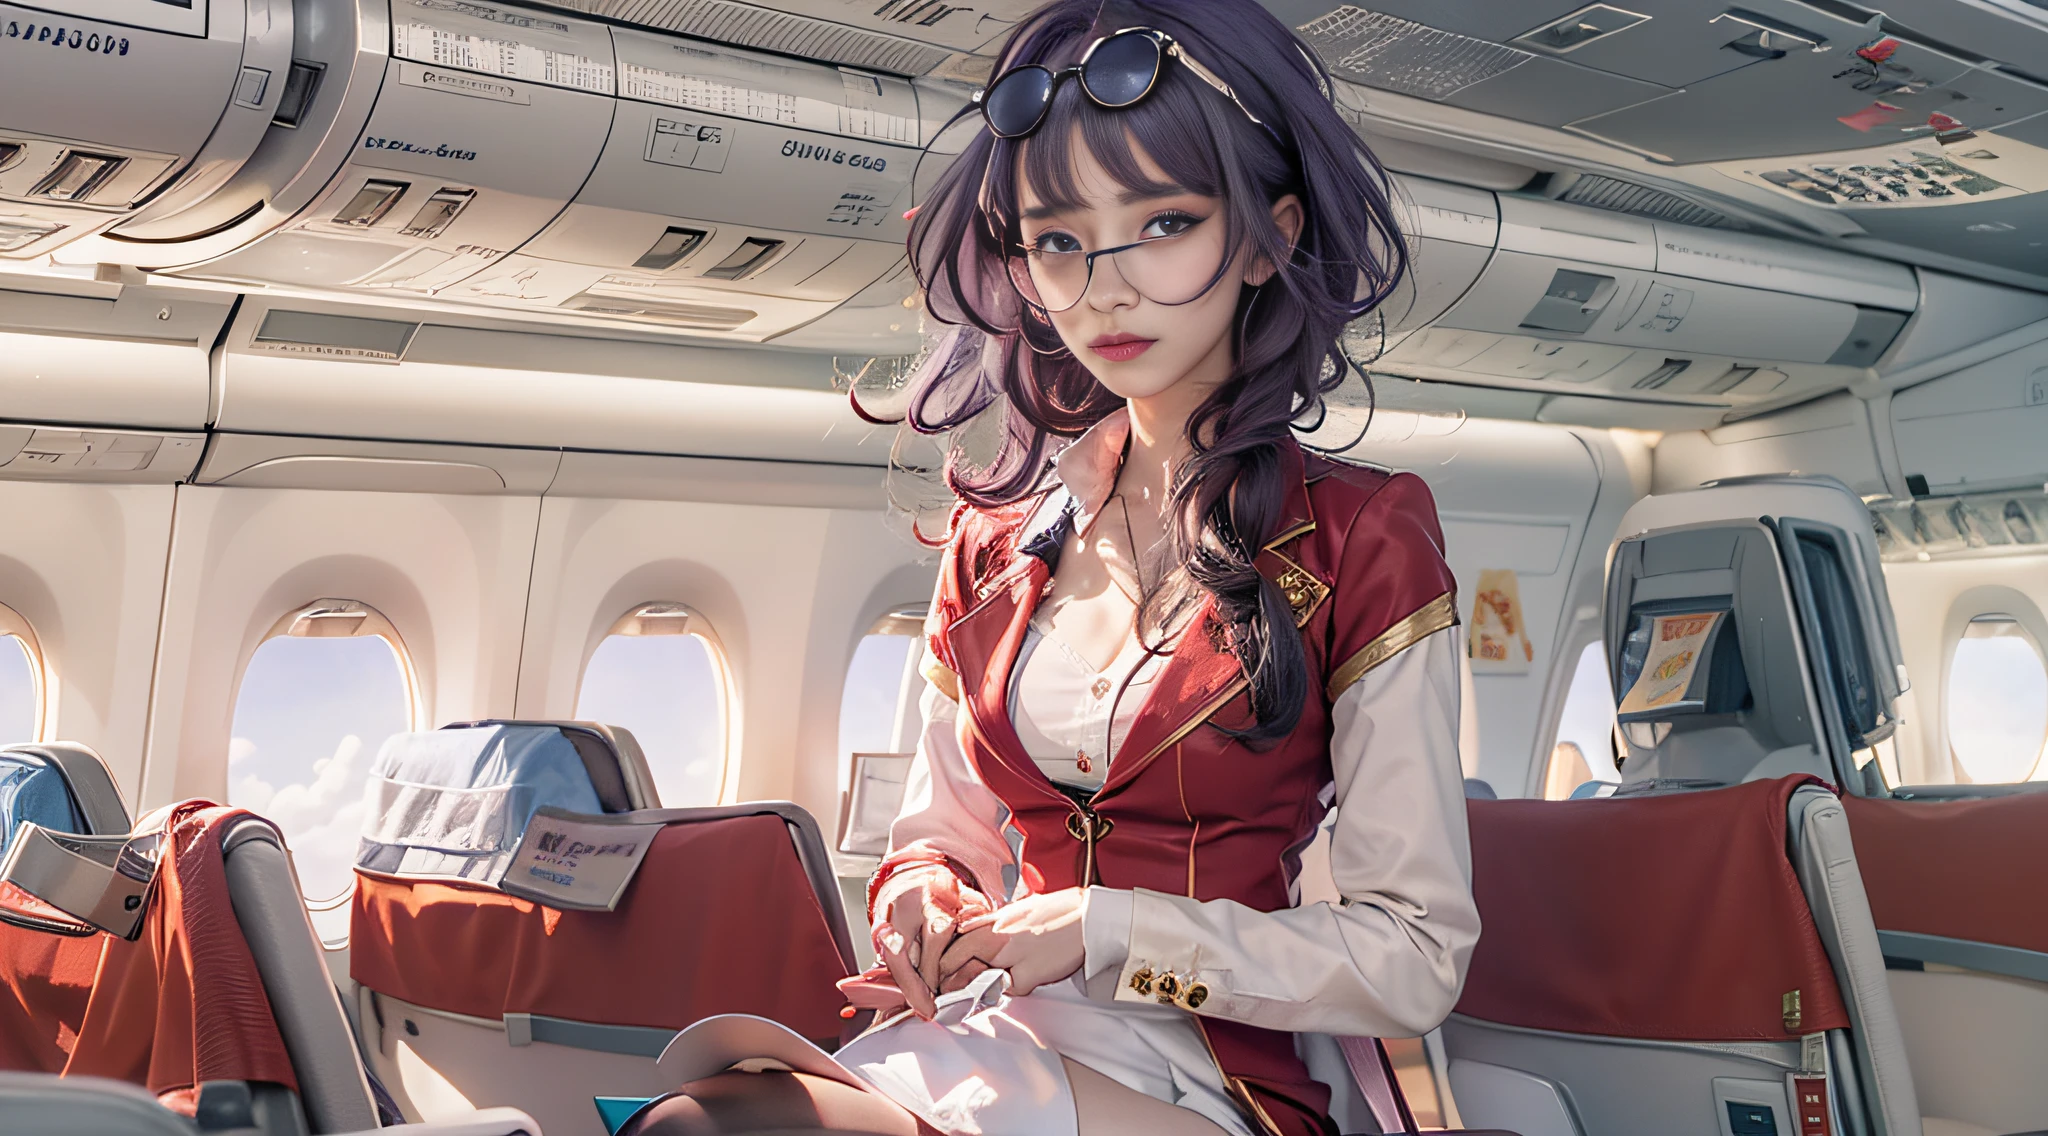 (Best quality: 1.1), (Realistic: 1.1), (Photography: 1.1), (highly details: 1.1), (1womanl), Airline flight attendants,Red coat,White shirt,Short skirt,black lence stockings,bent down,In the plane,KafkaHKS,hong kong,Purple eyes, Purple hair, eyewear on head, sunglasses,Large breasts,